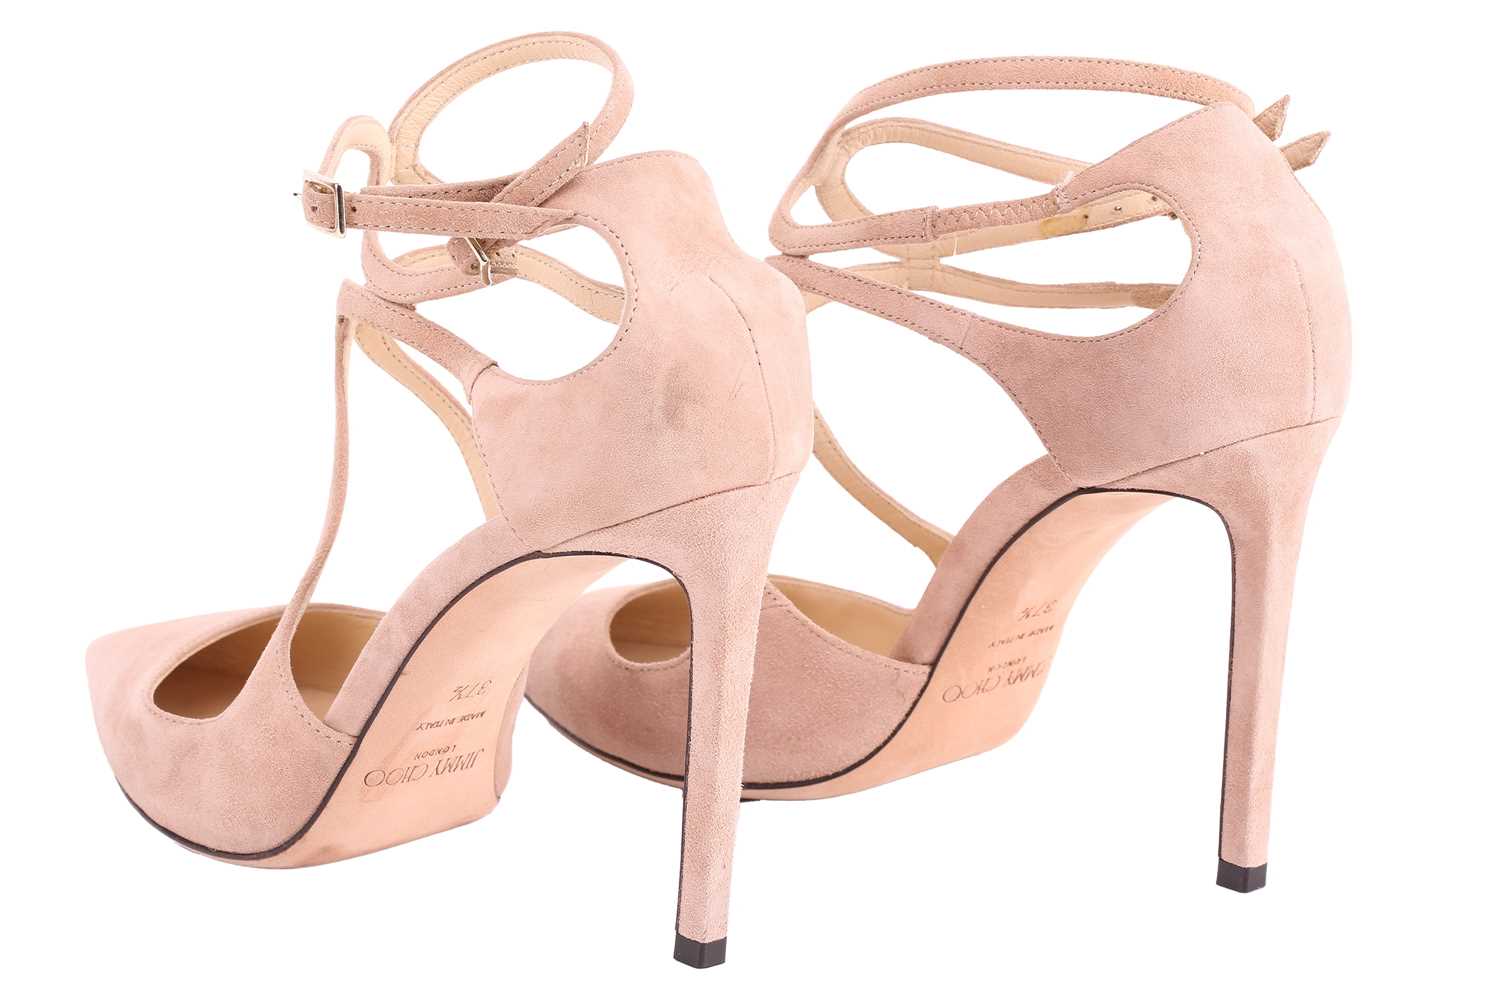 Two pairs of Jimmy Choo heels; including a pair of 'Lancer' pumps in dusty pink suede leather, featu - Image 6 of 20